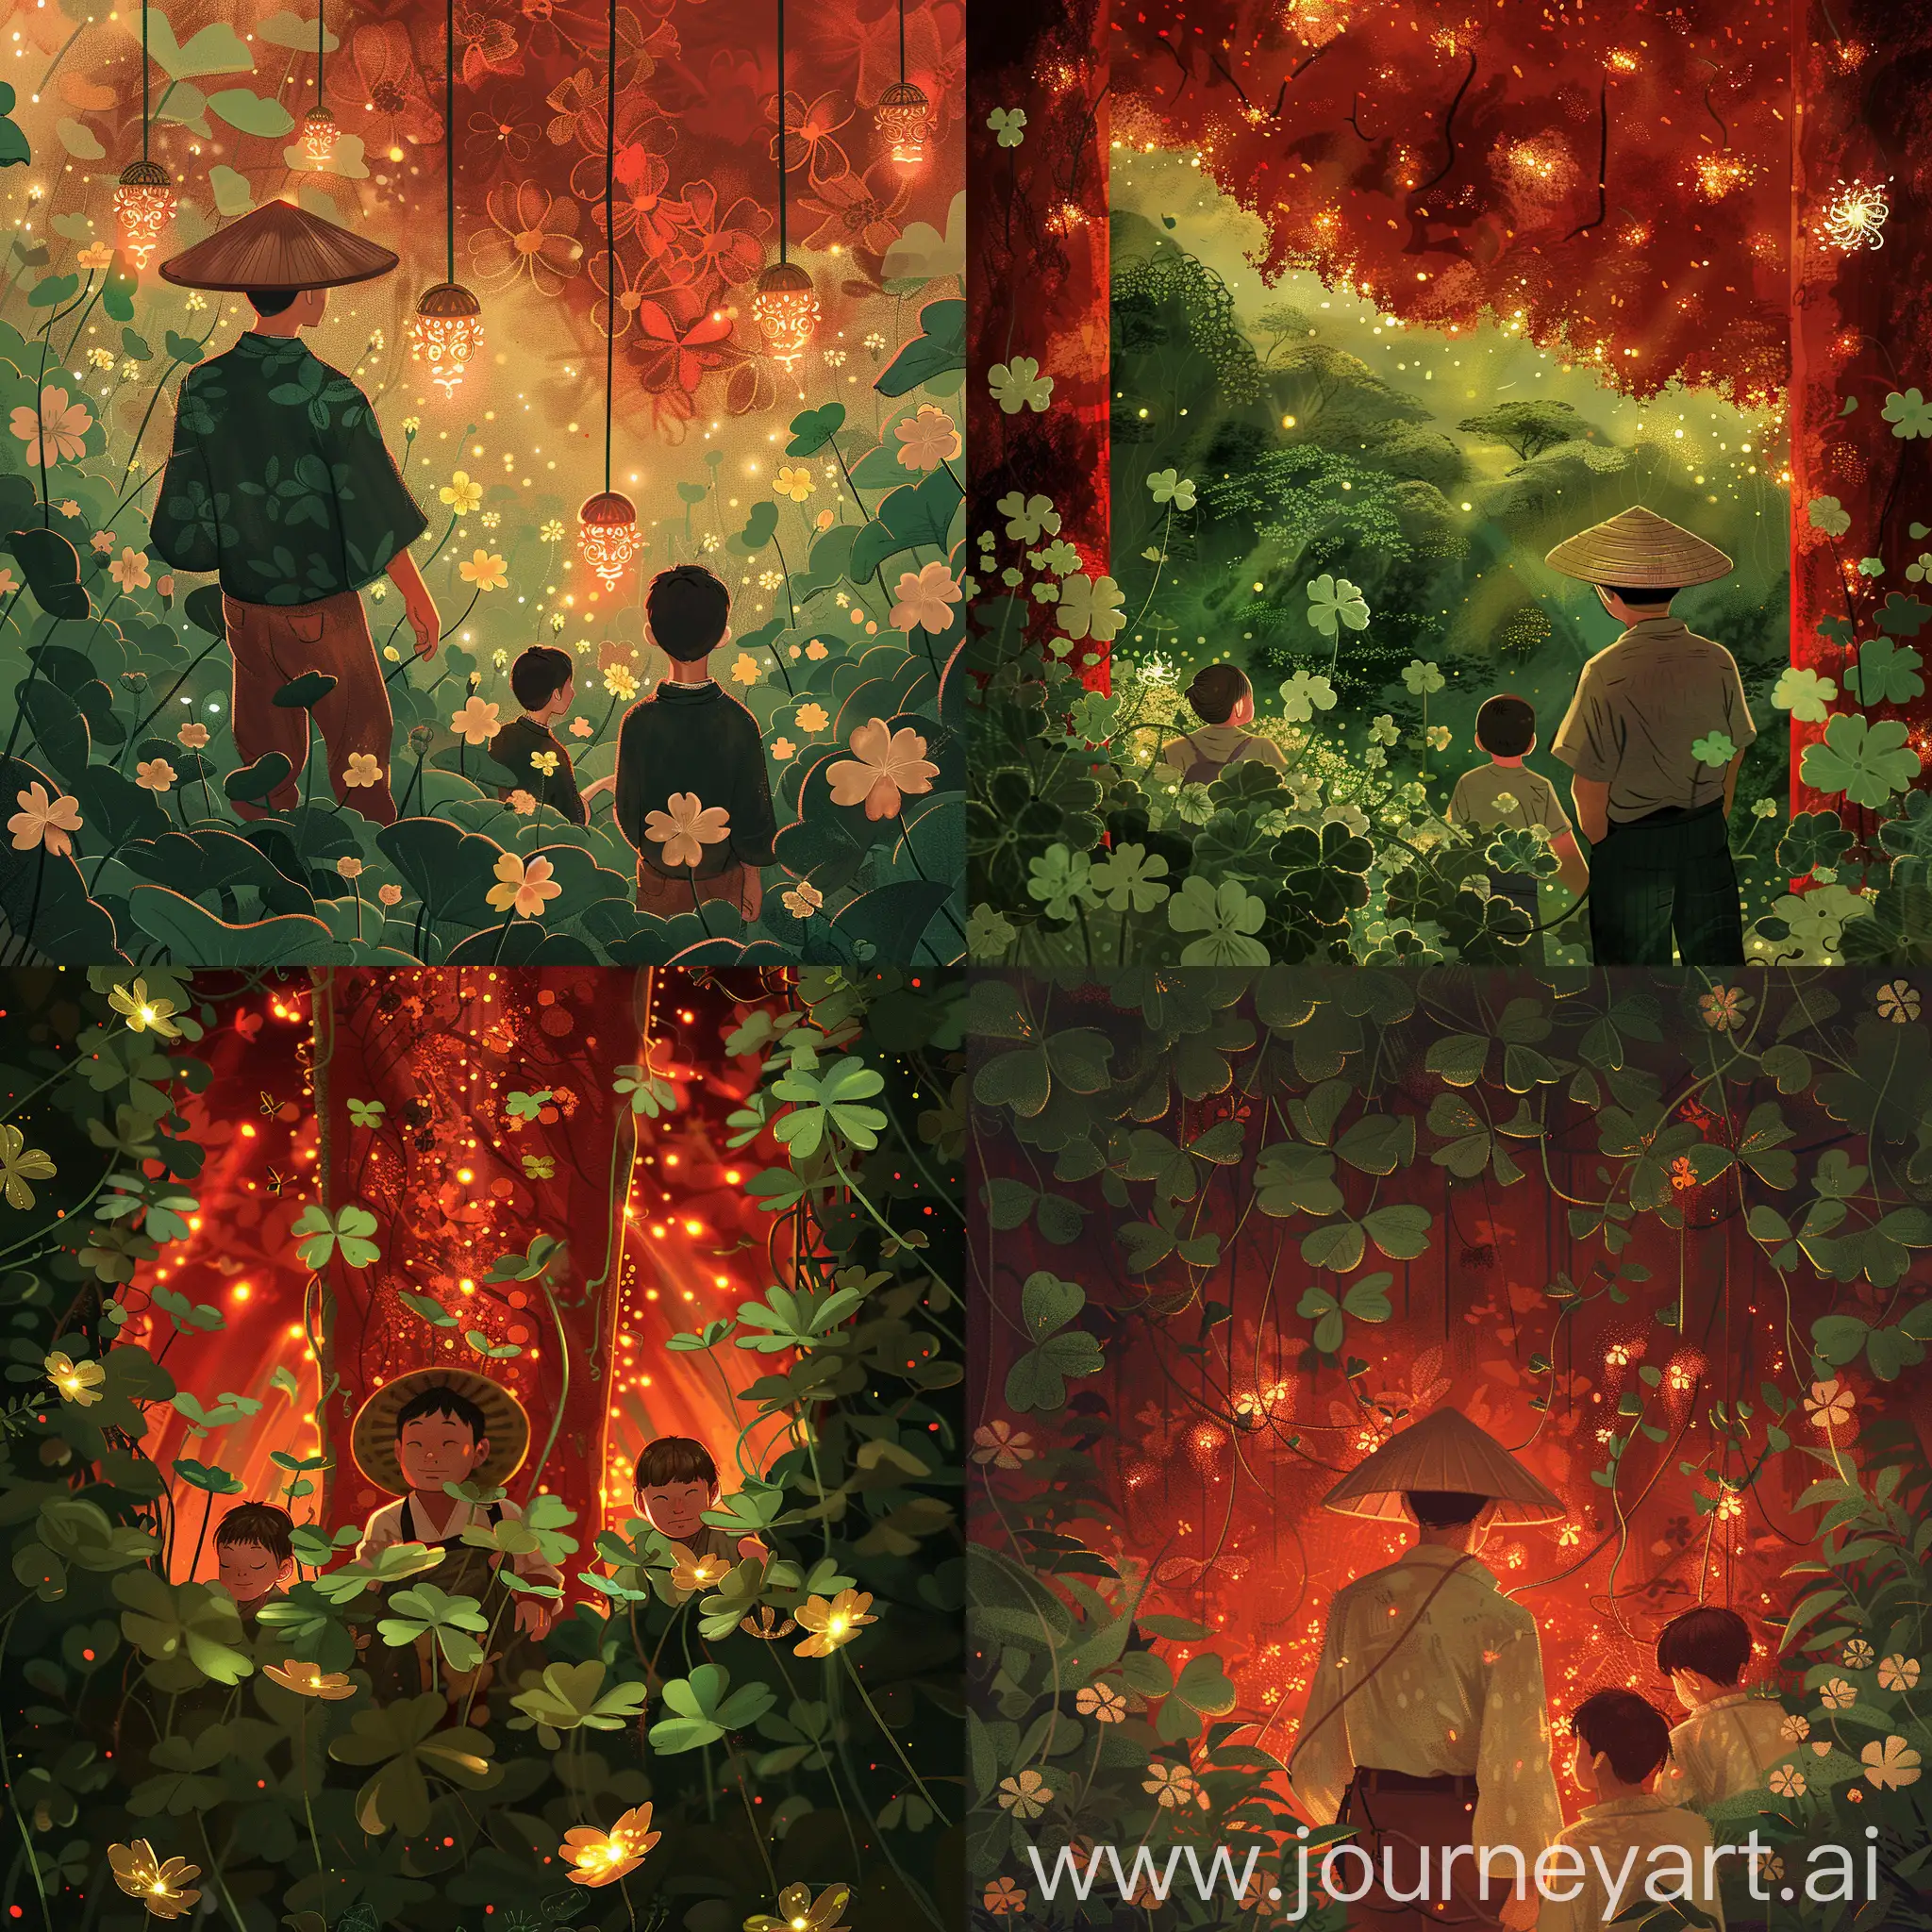 an illustration exploration a japan man on climbing hat with a 2boys, looking ((clover flowers lights))(zoom up), clover flowers fields jungle, in the style of dark gold molten filigree and red, confessional, playful and whimsical designs, notable sense of movement, i can't believe how beautiful this is, high-angle, hanging scroll